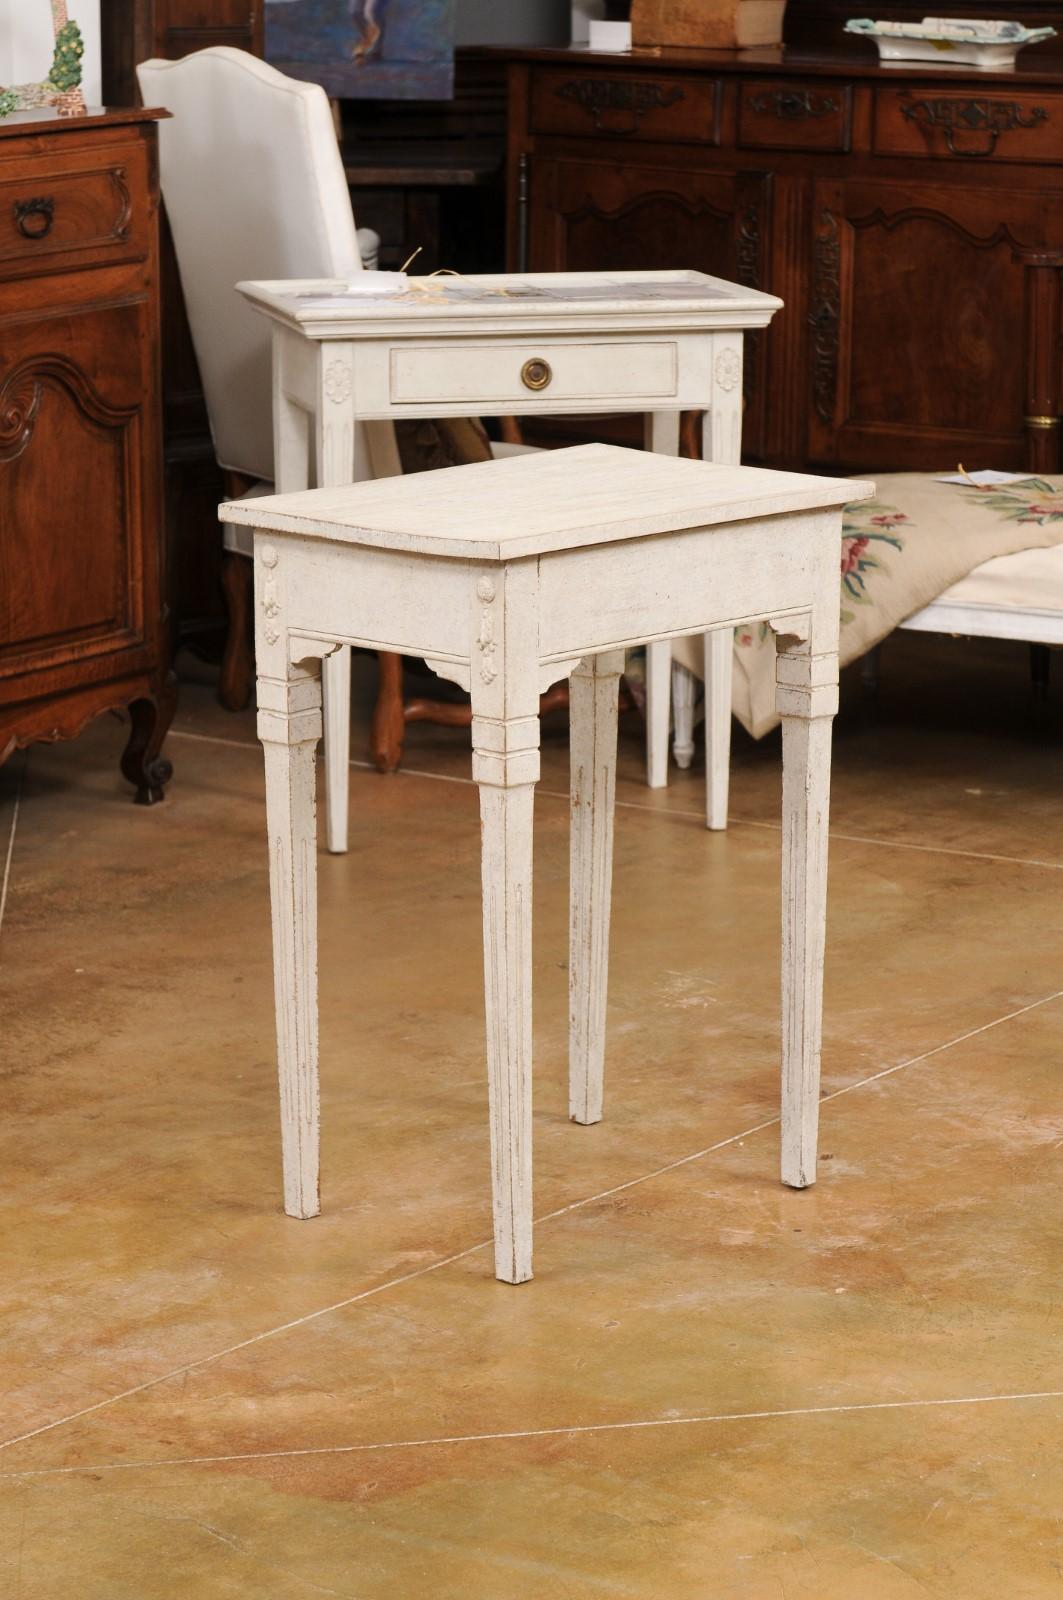 A petite Swedish painted wood console table from the late 19th century with two drawers, carved motifs and fluted tapering legs. Created in Sweden during the later years of the 19th century, this petite console table features a rectangular top